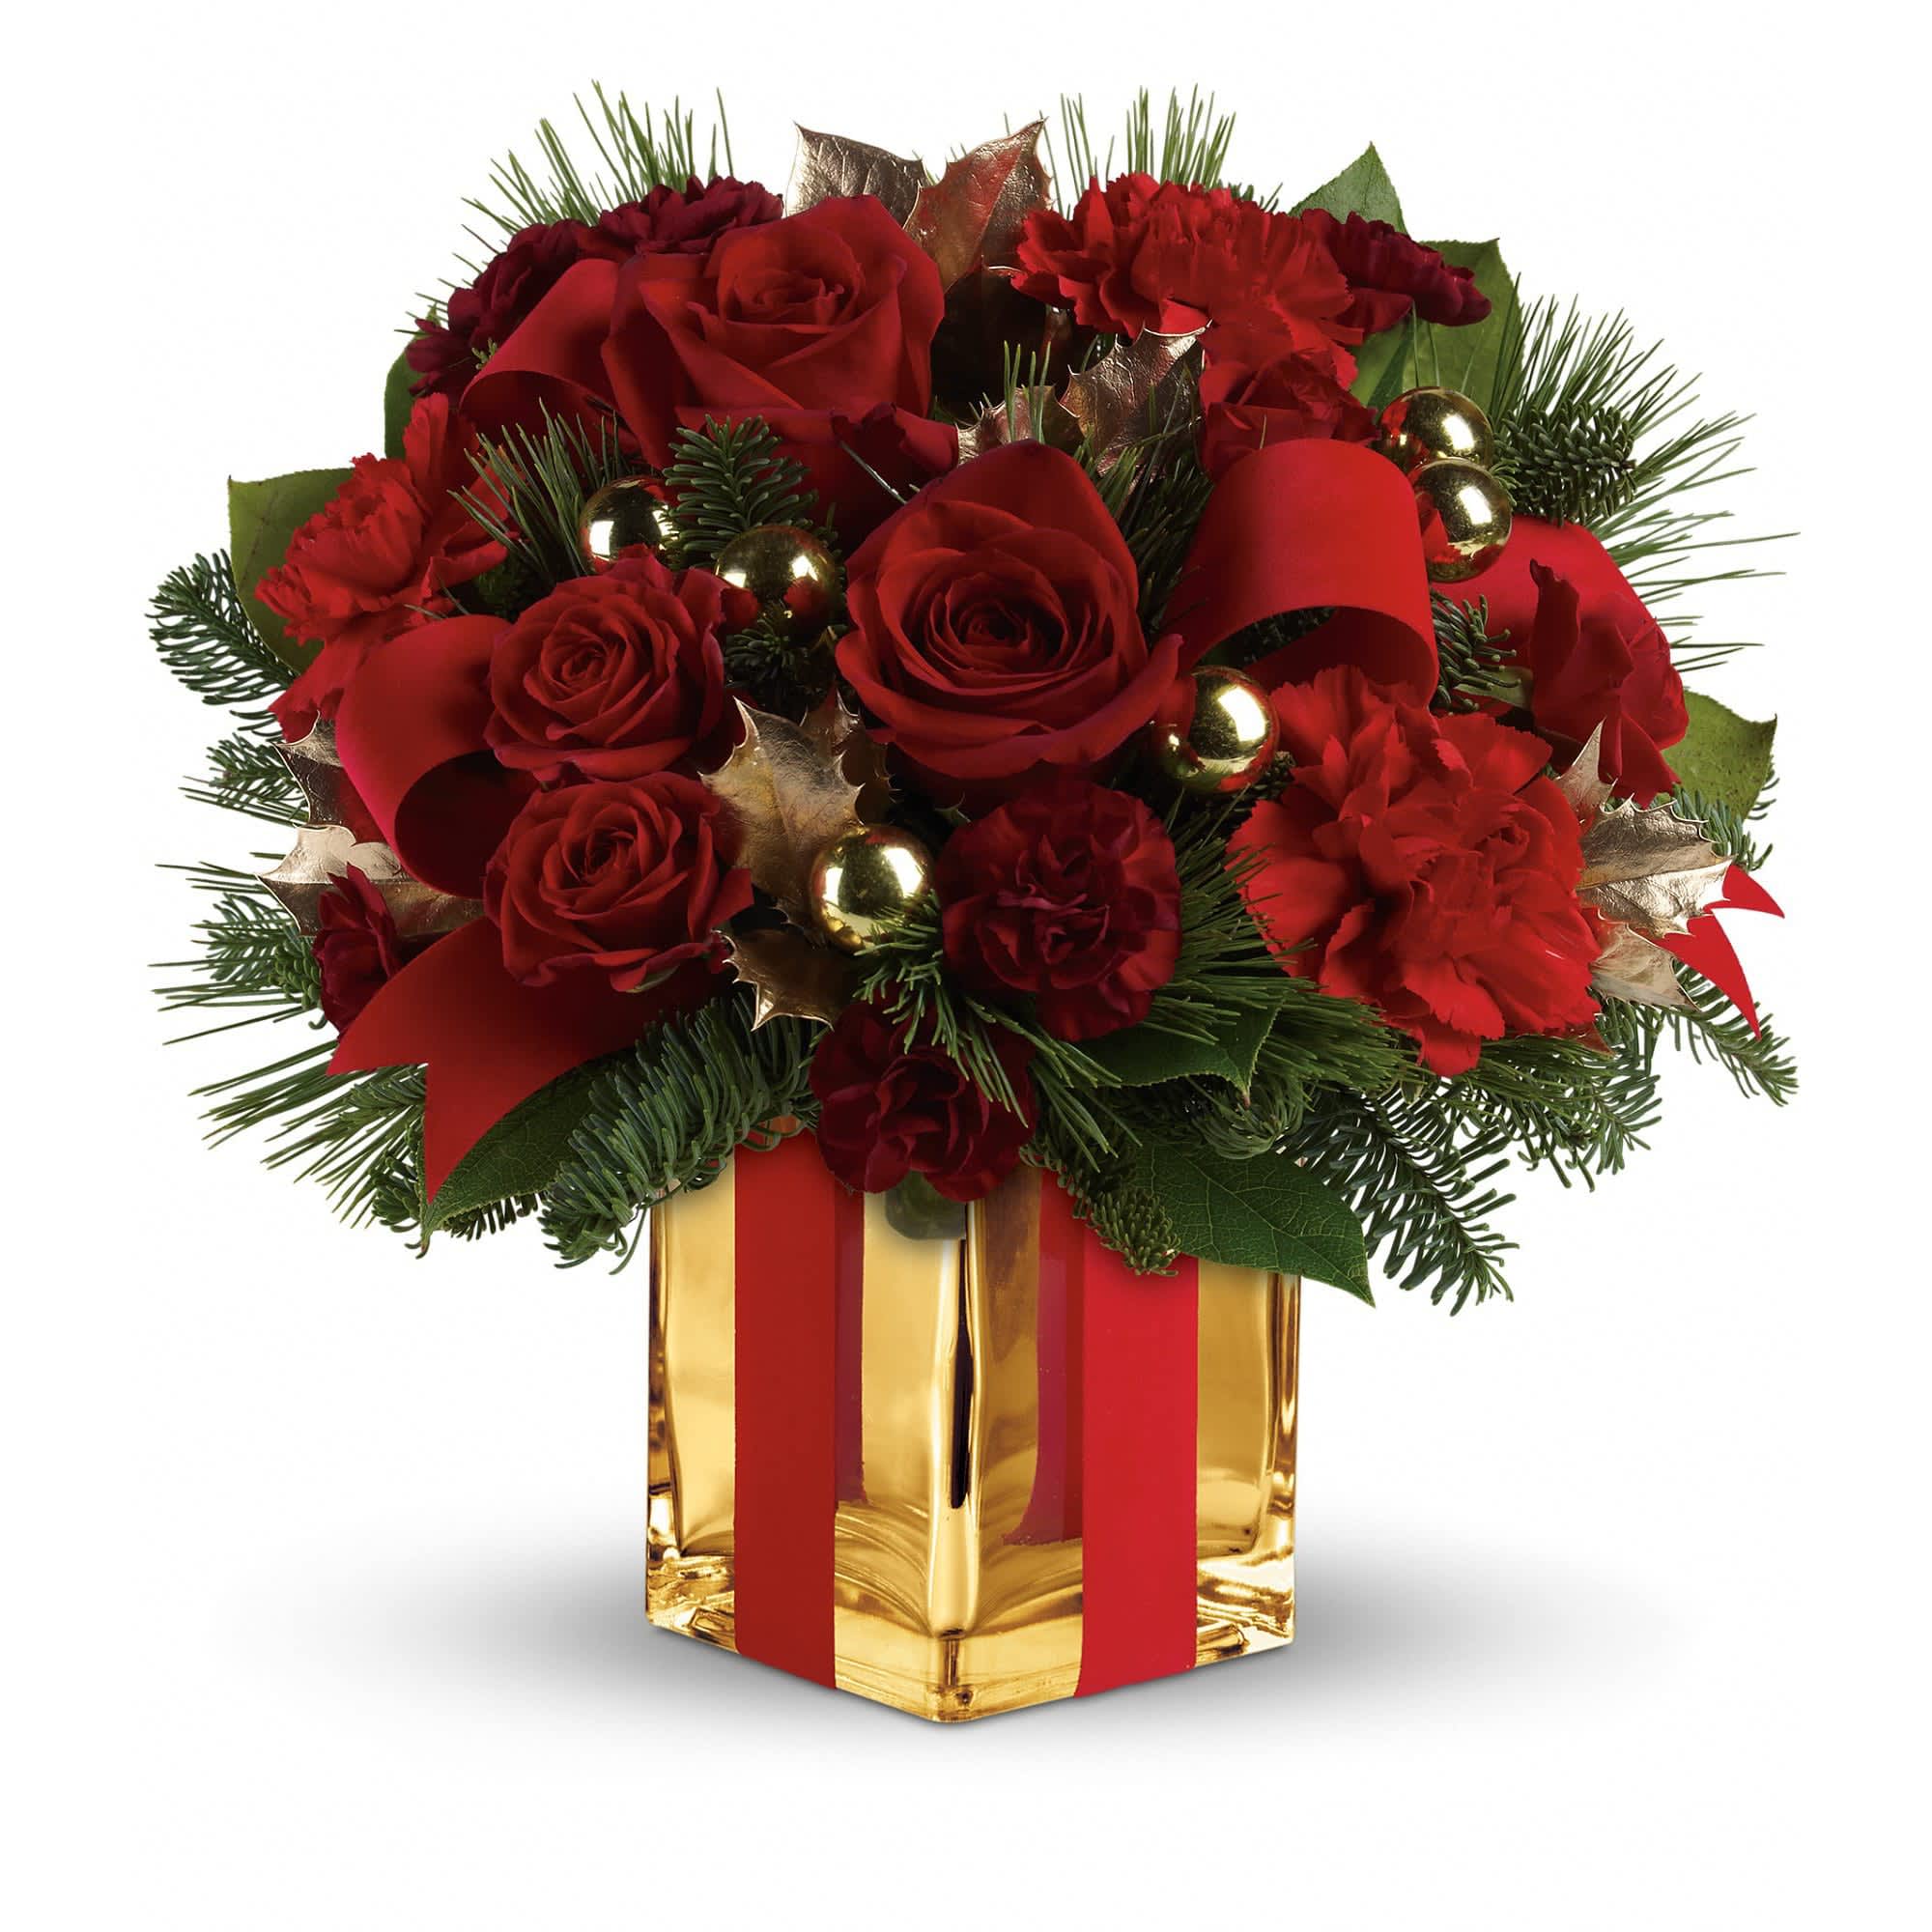 All Wrapped Up Bouquet by Teleflora - Lush red roses, fresh winter greens and a festive, gold mirrored glass cube are all wrapped up with red ribbon for an elegant, unforgettable gift!    This bouquet of deep red roses and spray roses, red carnations, maroon miniature carnations, green holly, noble fir, white pine and lemon leaf is dressed up with red velveteen ribbon and gold ornament balls. Delivered in a stunning gold Mirrored Cube vase.    Approximately 12 1/4&quot; W x 11 3/4&quot; H    Orientation: One-Sided    As Shown : TWR08-2A  Deluxe : TWR08-2B  Premium : TWR08-2C